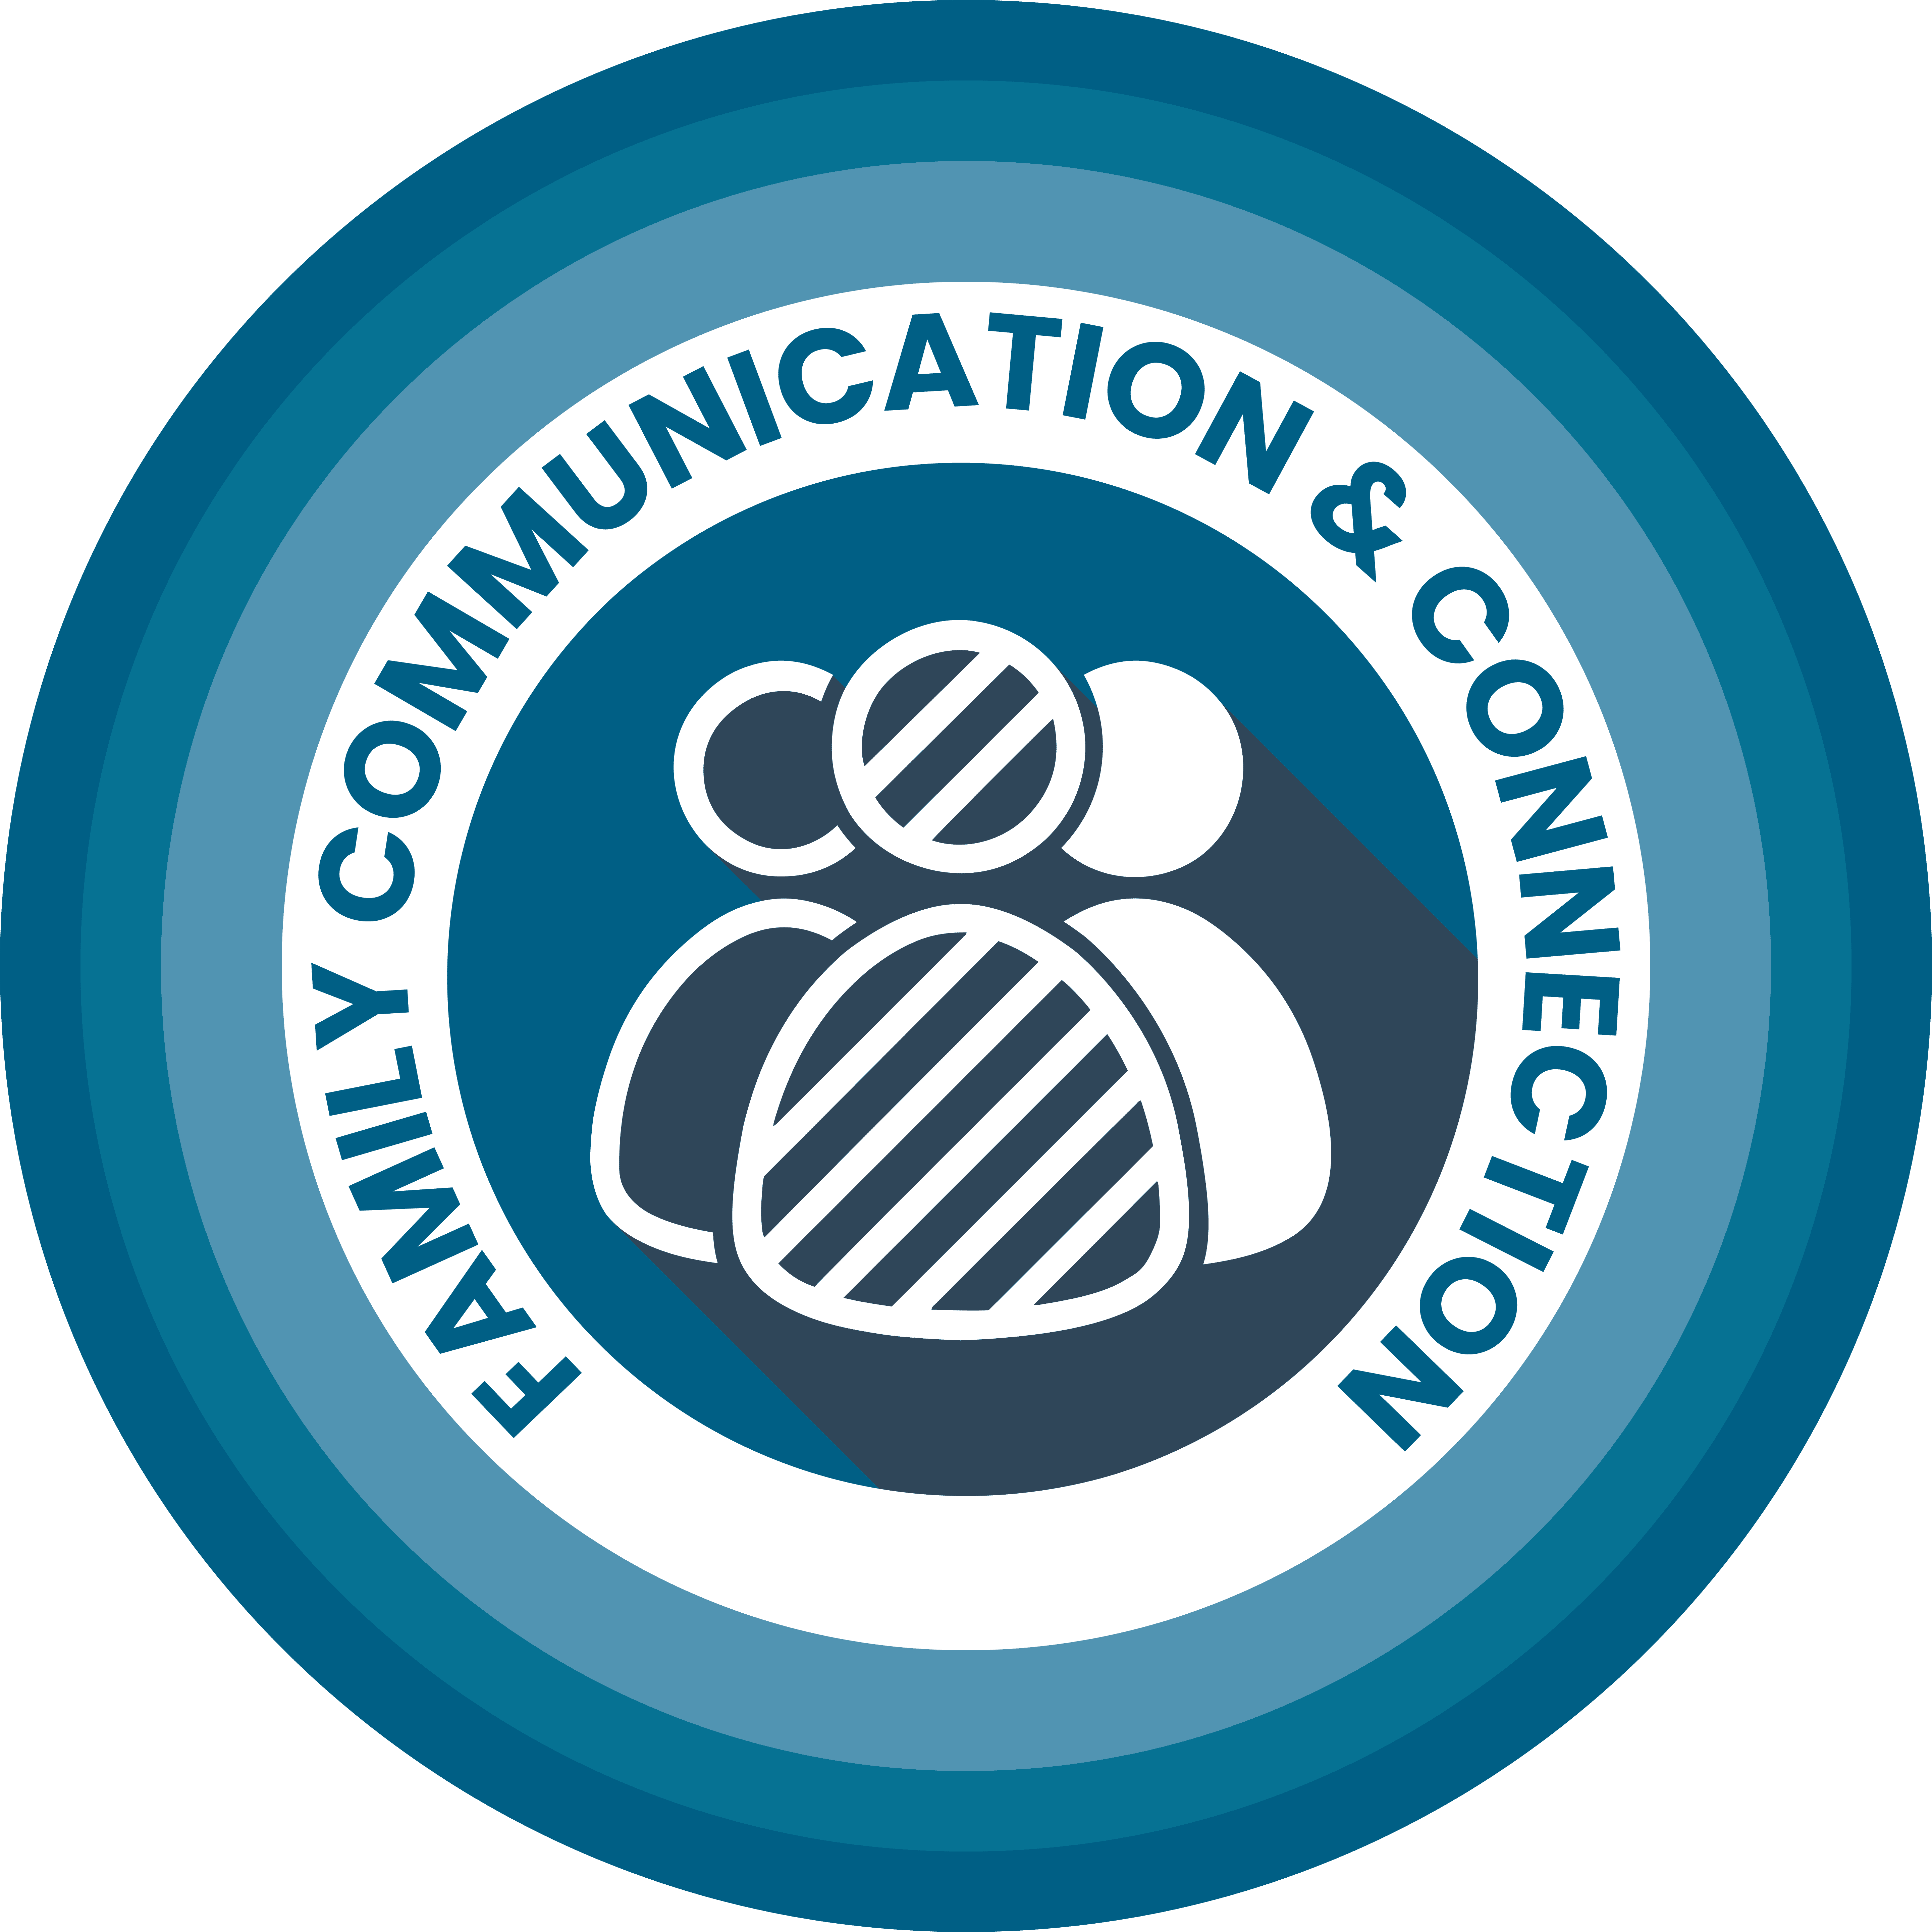 FAMILY COMMUNICATION & CONNECTION